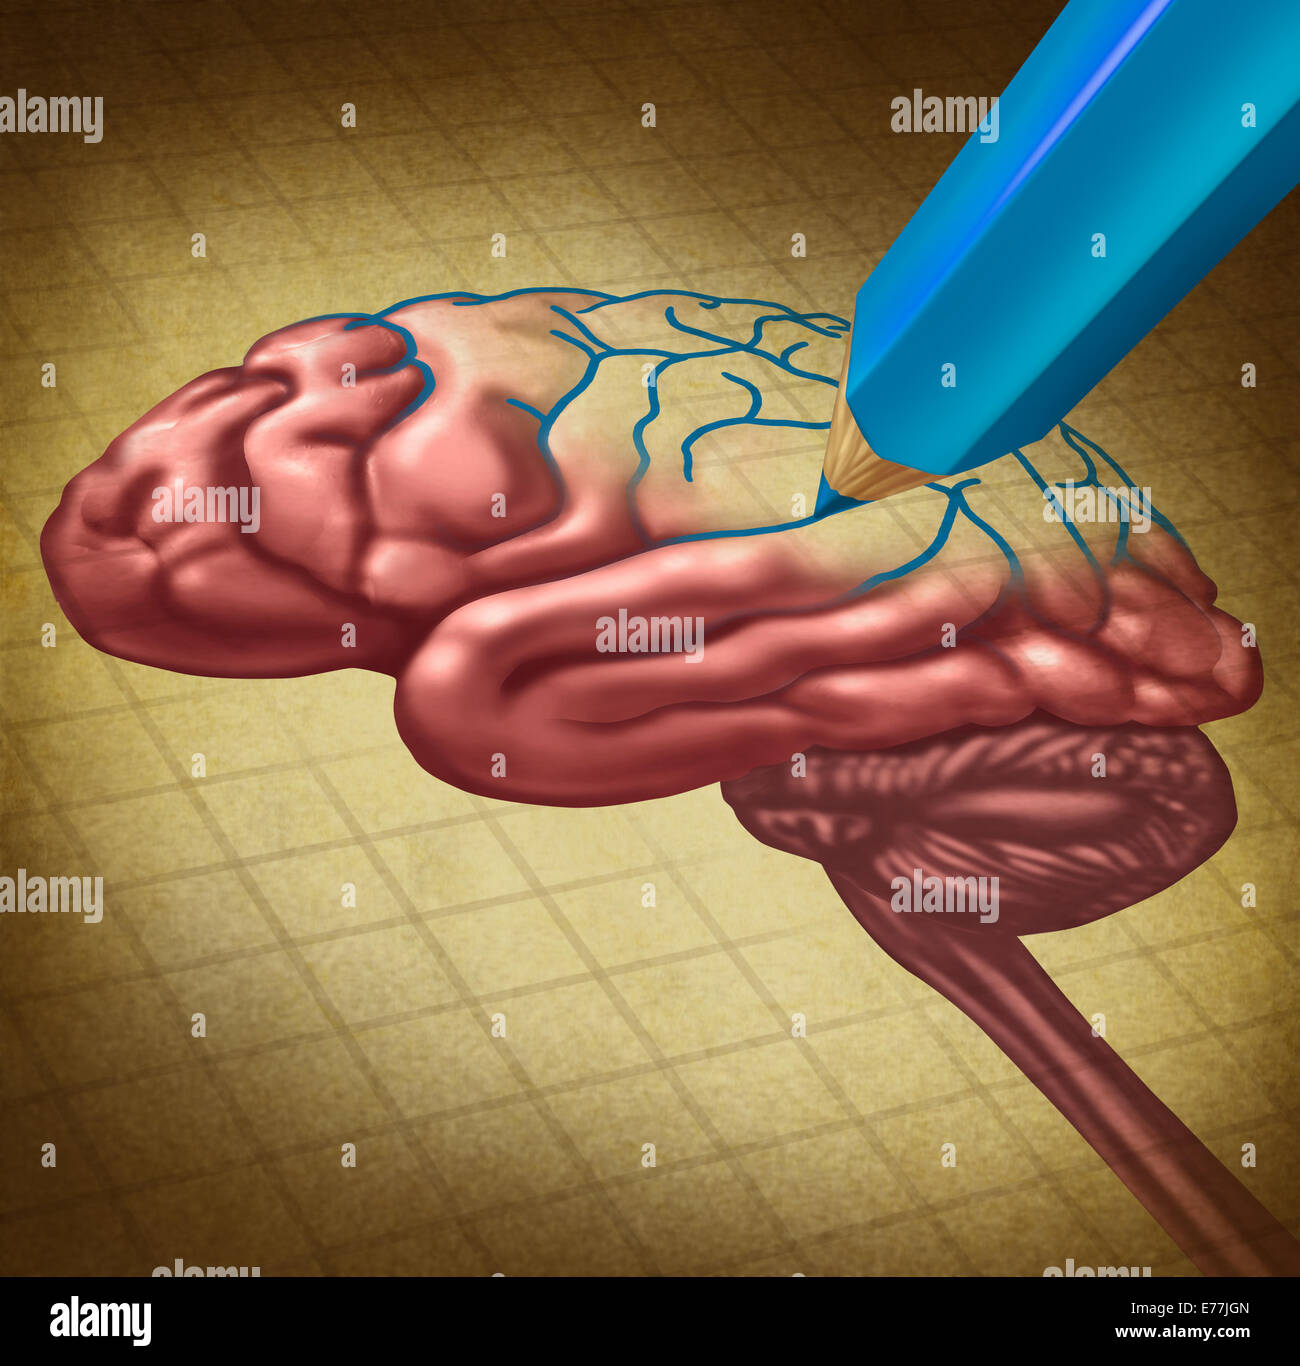 Repairing the brain and restoring lost memory medical concept as a human thinking organ with a missing portion being redrawn with a blue pencil as a symbol and metaphor for doctor care and research in neurology or brainwashing. Stock Photo